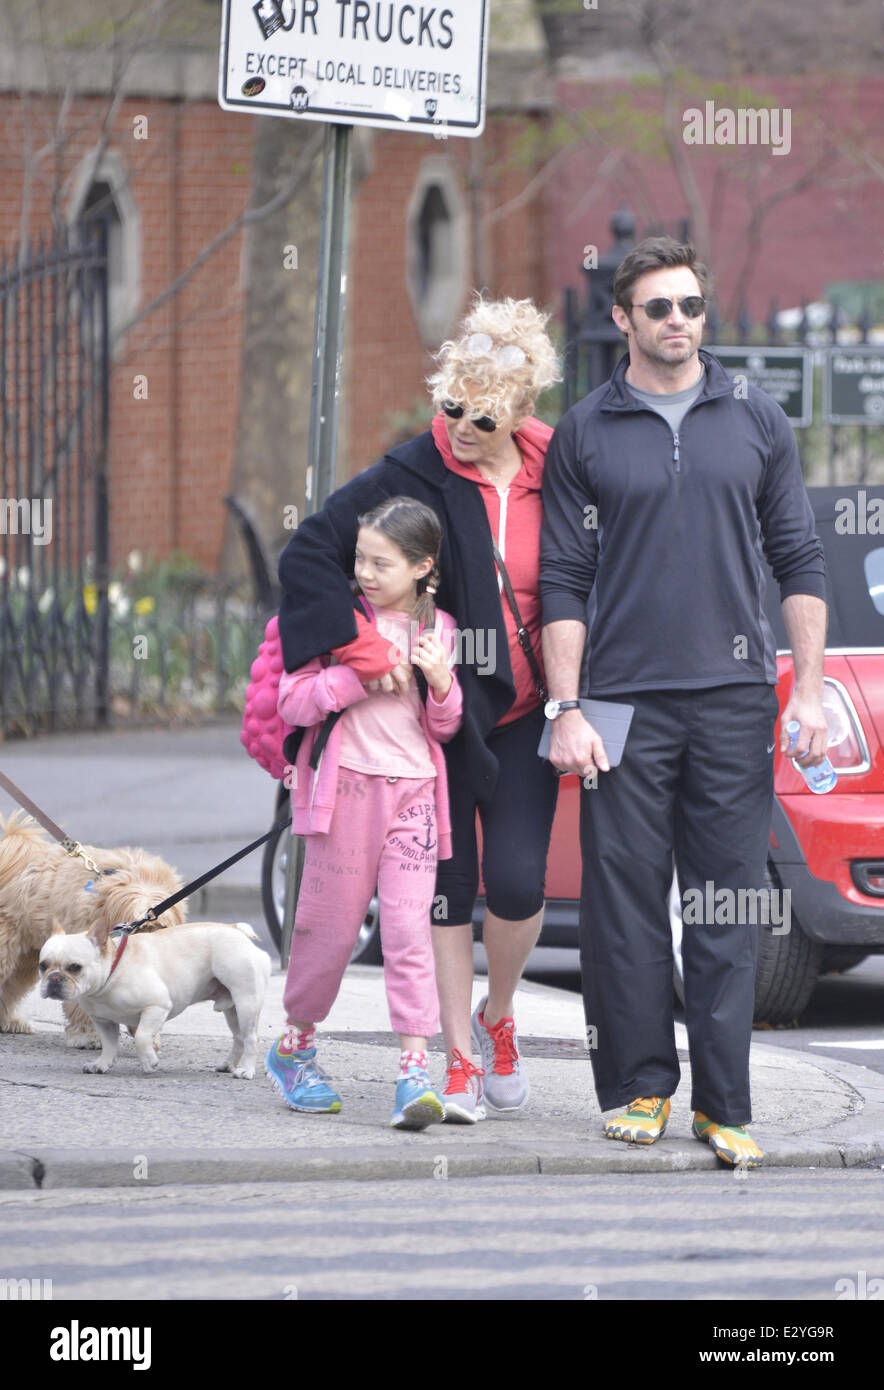 Hugh Jackman and wife Deborra-Lee Furness walk their daughter Ava Jackman to school  Featuring: Hugh Jackman,Ava Eliot Jackman,Deborra-Lee Furness Where: New York, NY, United States When: 11 Apr 2013 Stock Photo